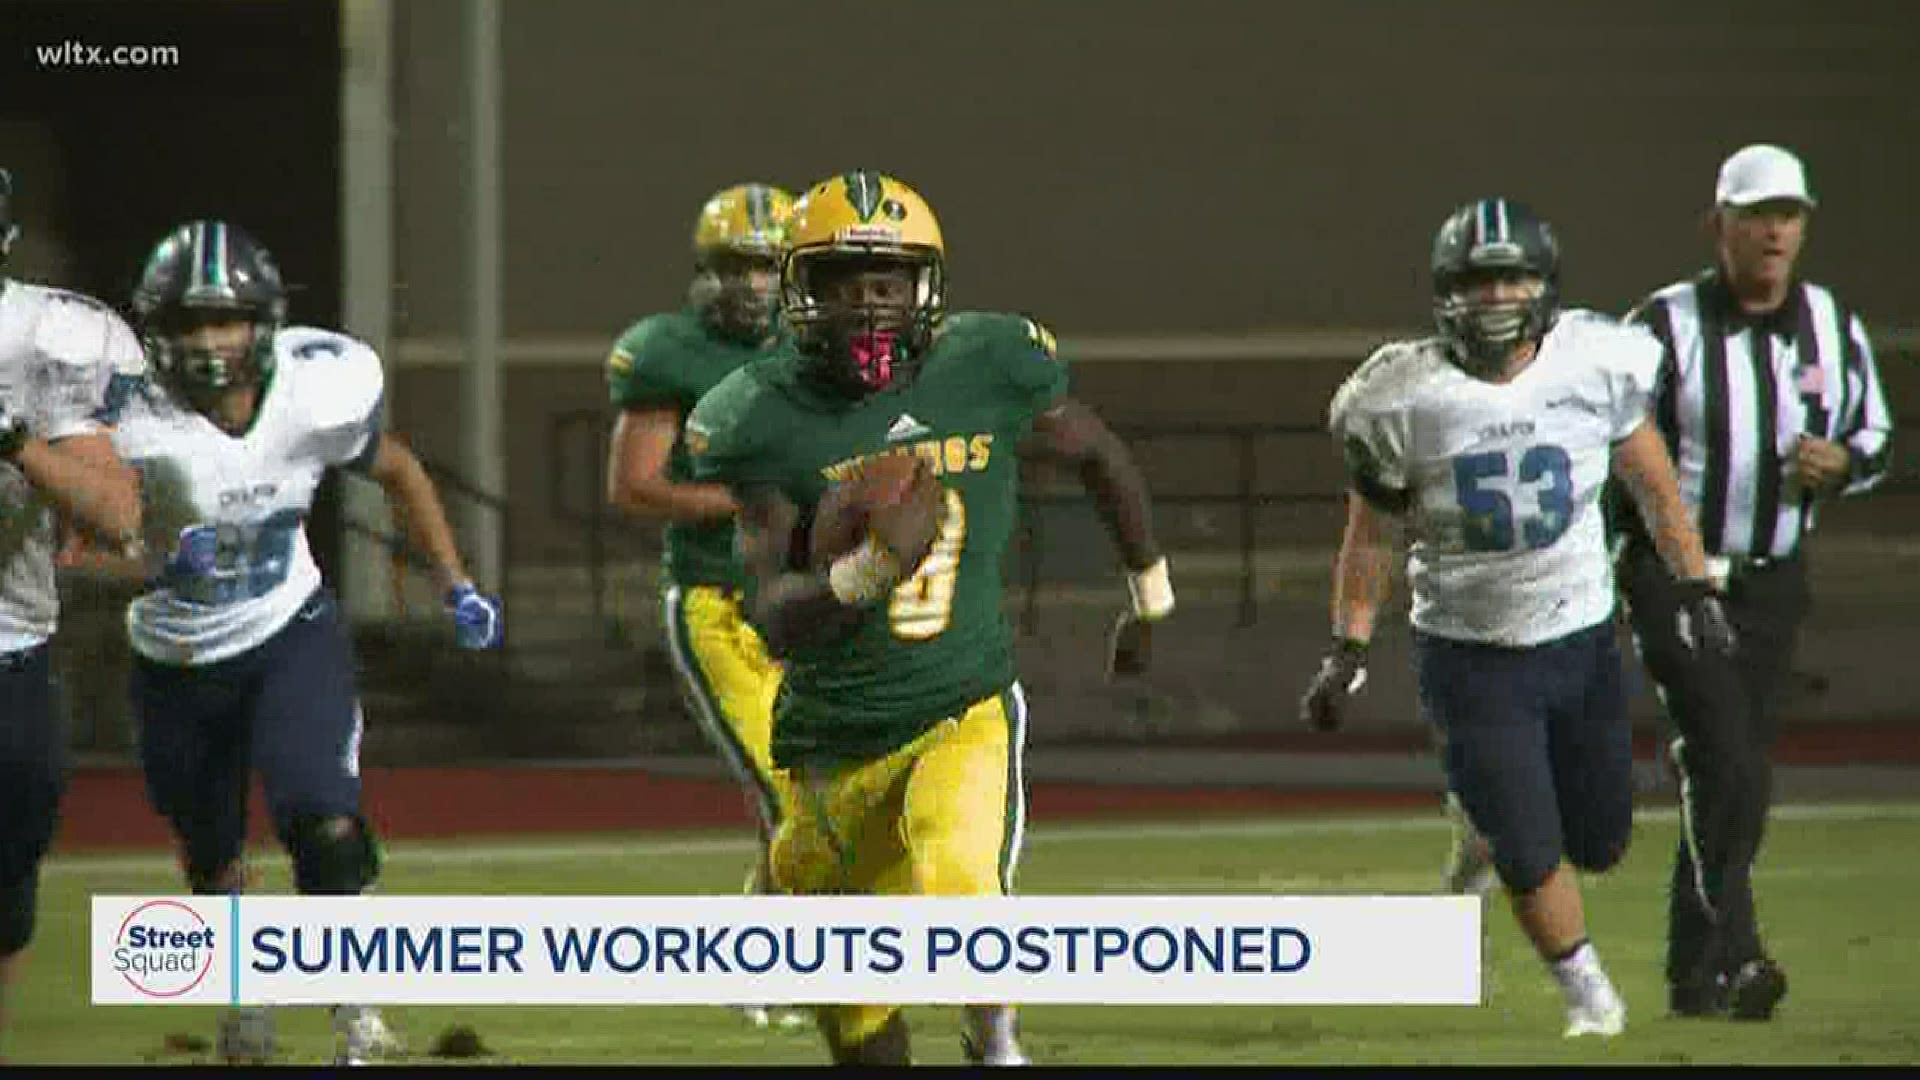 Lexington Richland 5, Richland 2 and Richland 1 have postponed summer workouts due to the increase of cases of COVID-19